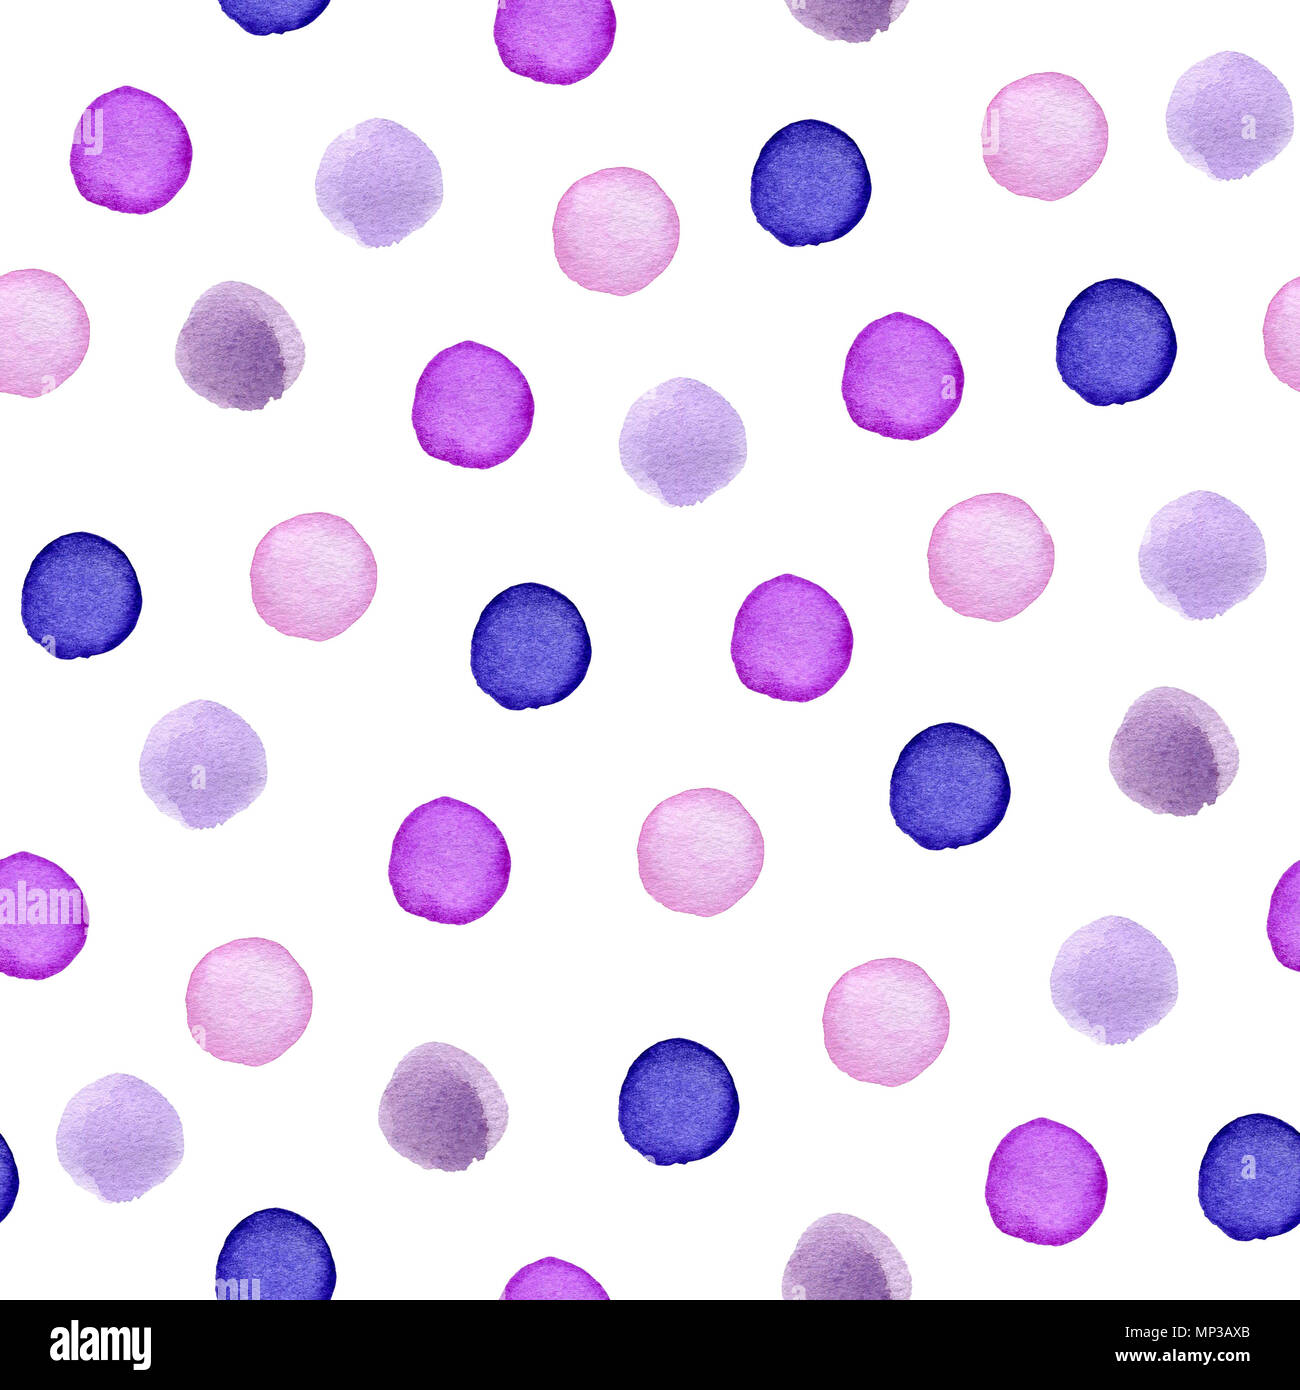 Decorative hand drawn watercolor seamless pattern with polka dots. Violet round blots on a white background Stock Photo